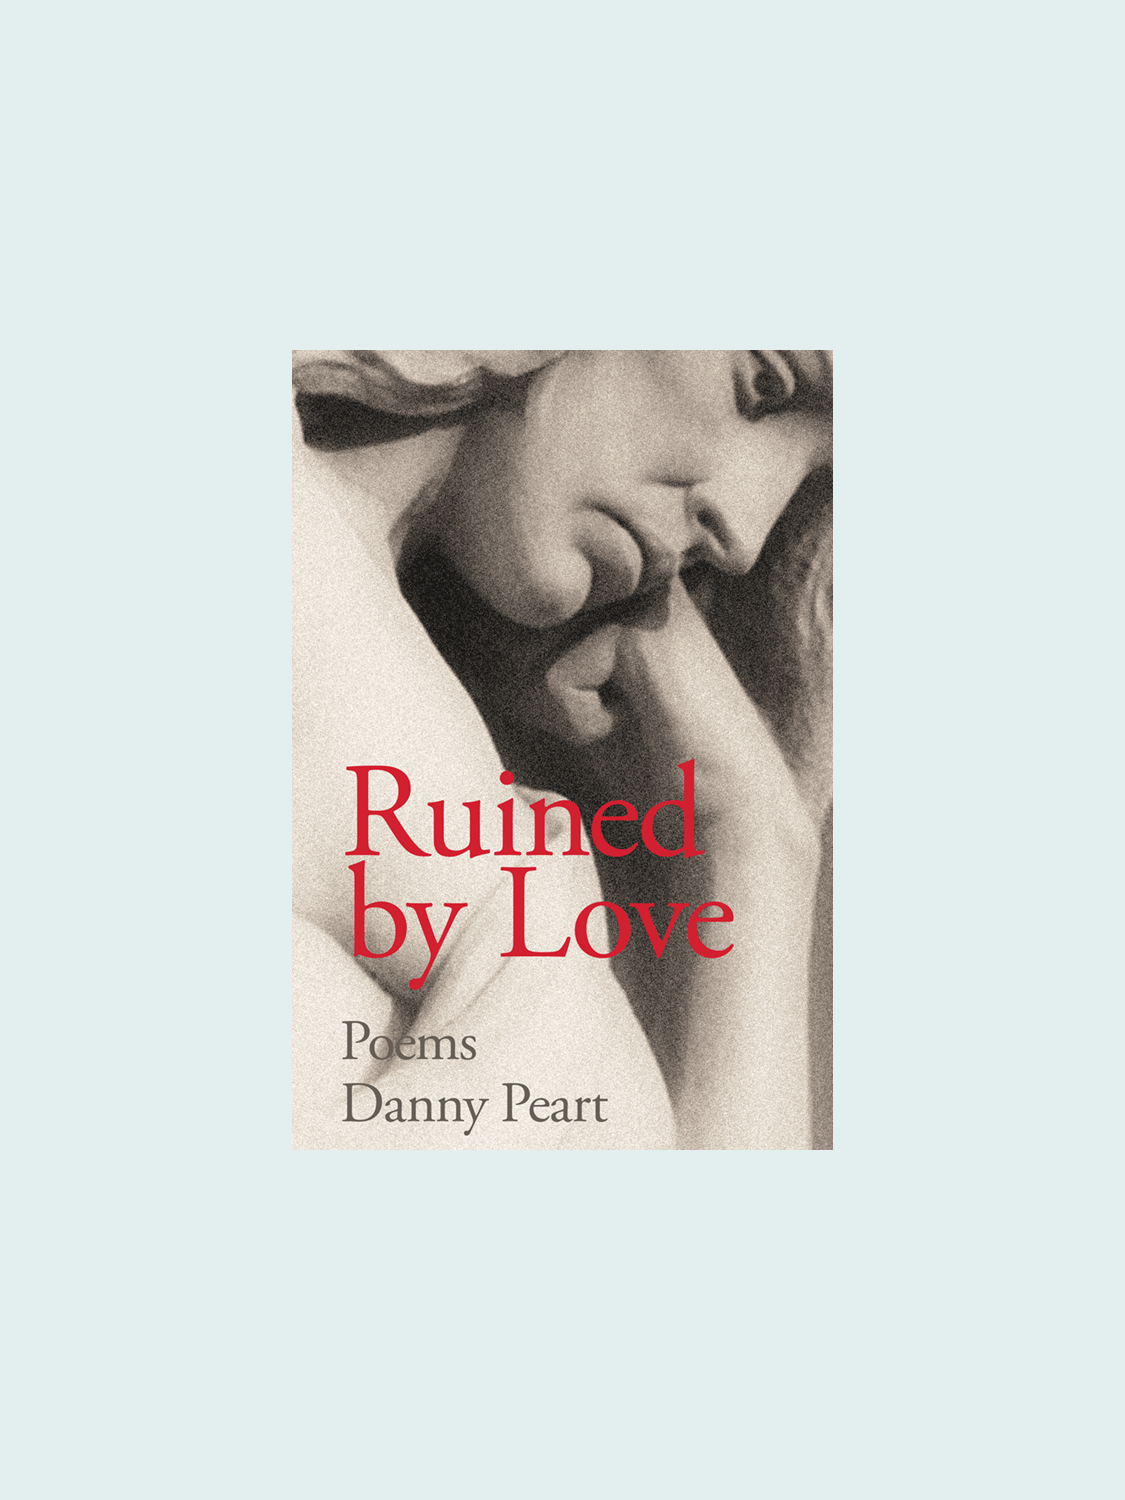 Book cover: Ruined by Love, Poems, by Danny Peart